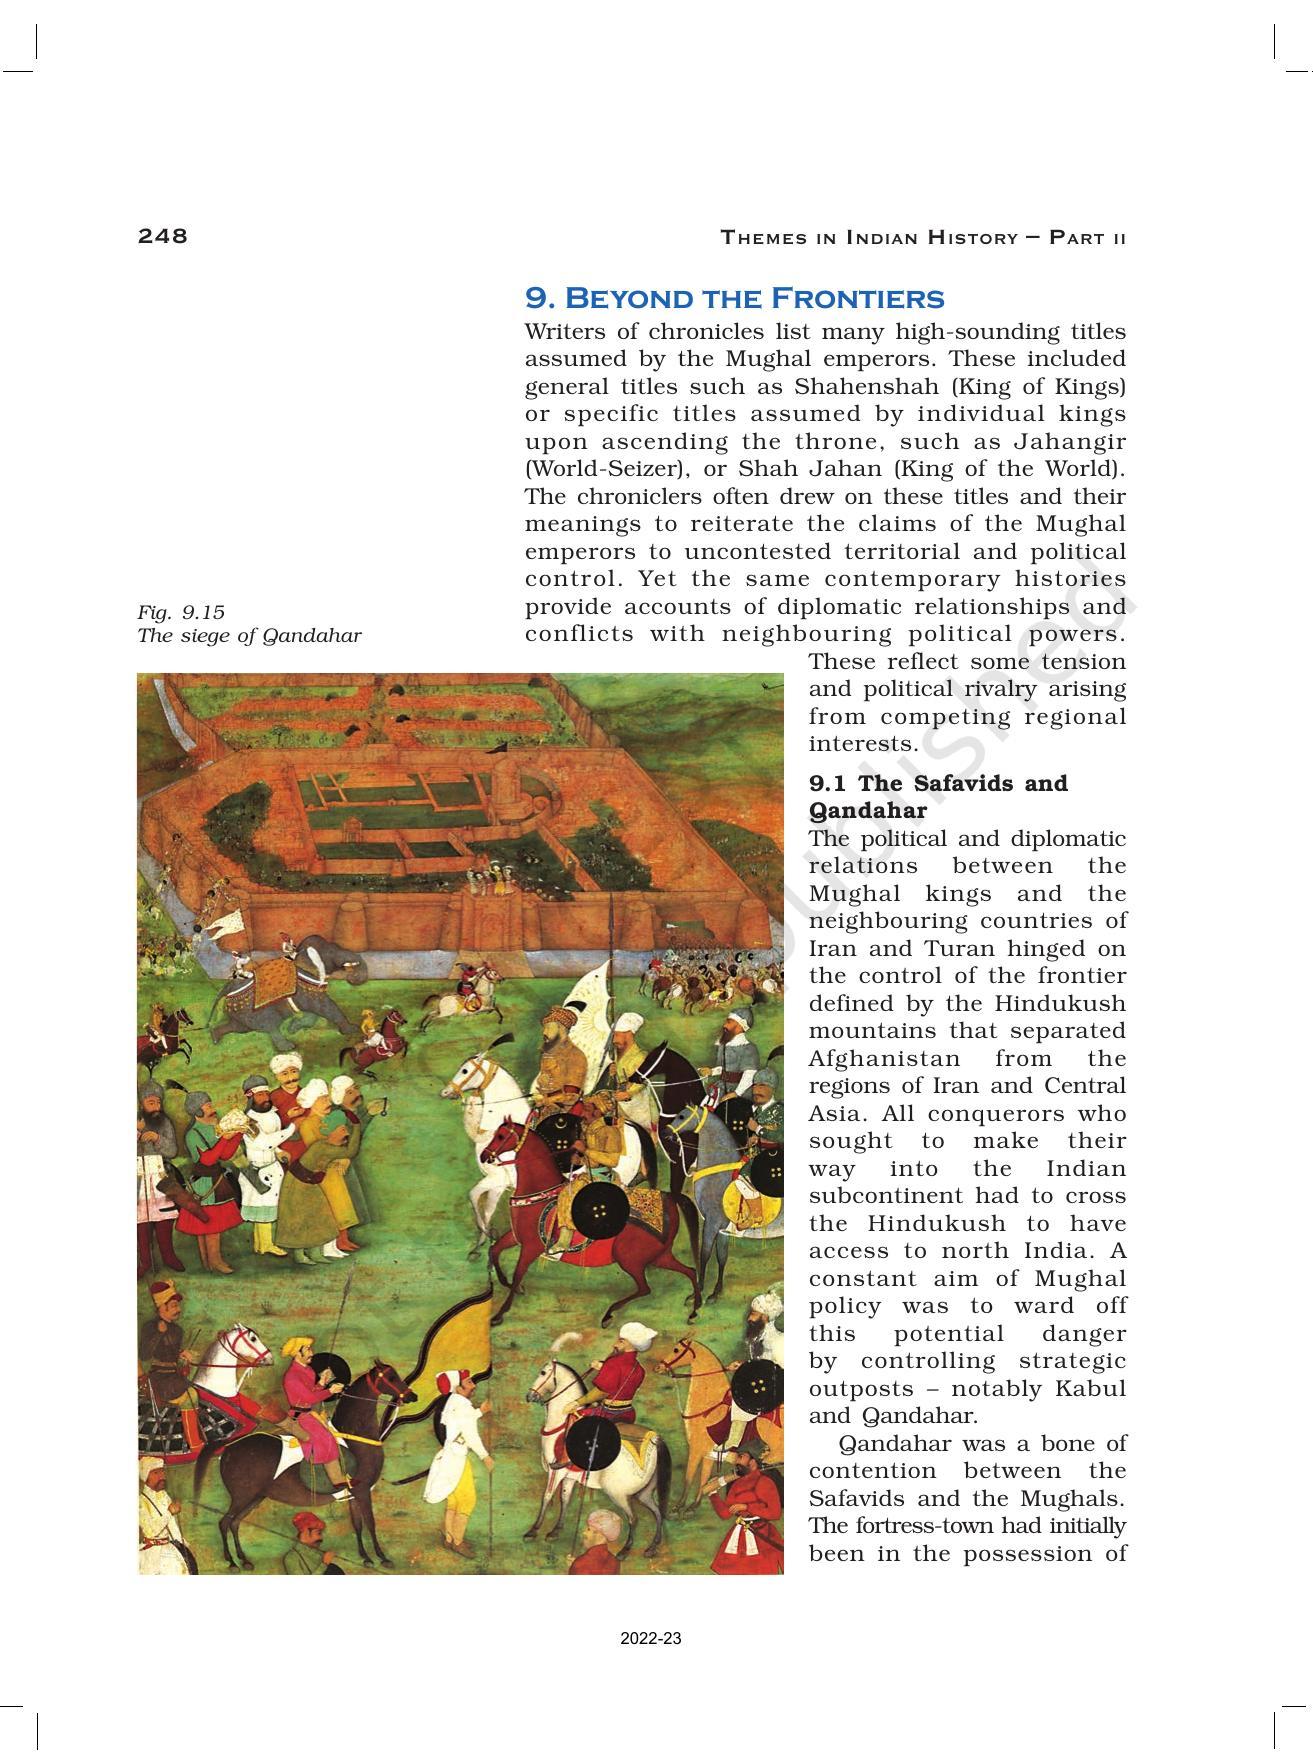 NCERT Book for Class 12 History (Part-II) Chapter 9 Kings and Chronicles - Page 25